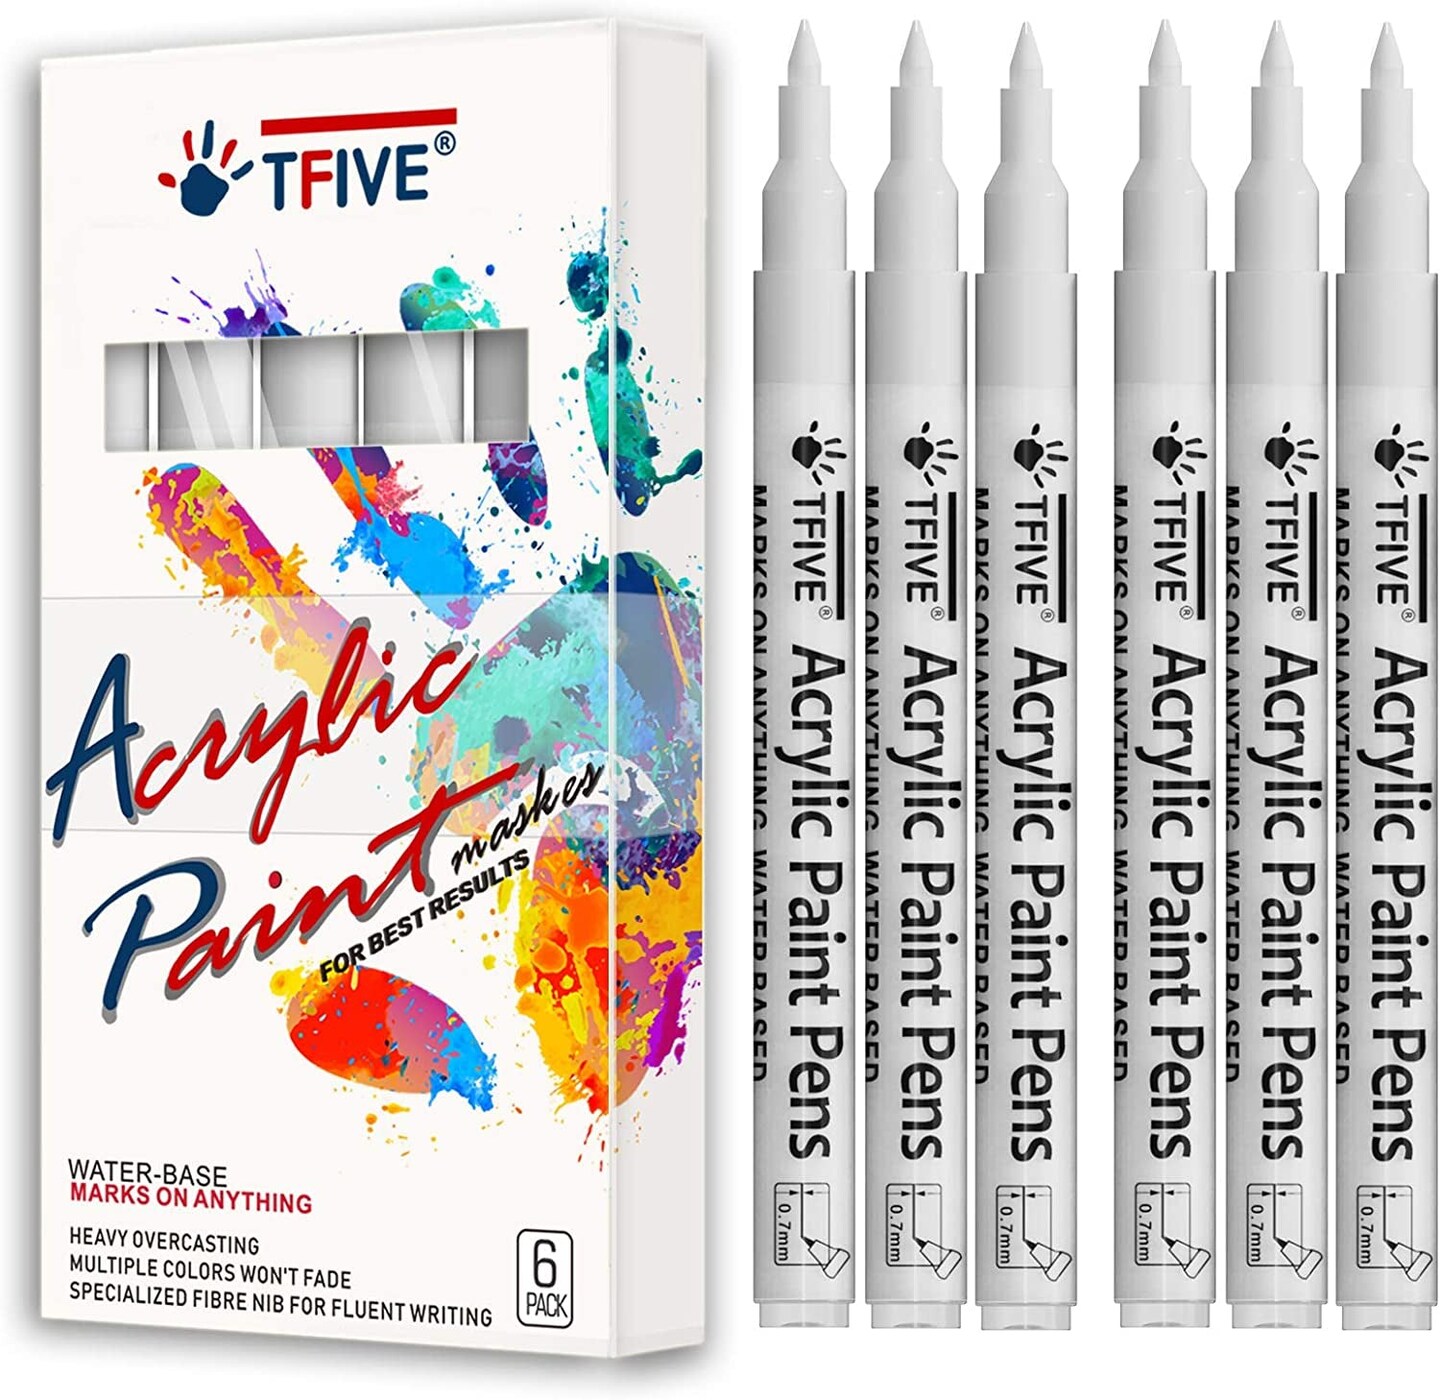 Blue Marker Paint Pens - 6 Pack Acrylic Blue Permanent Marker, 0.7mm Extra Fine Tip Paint Pen for Art Projects, Drawing, Rock Painting, Stone